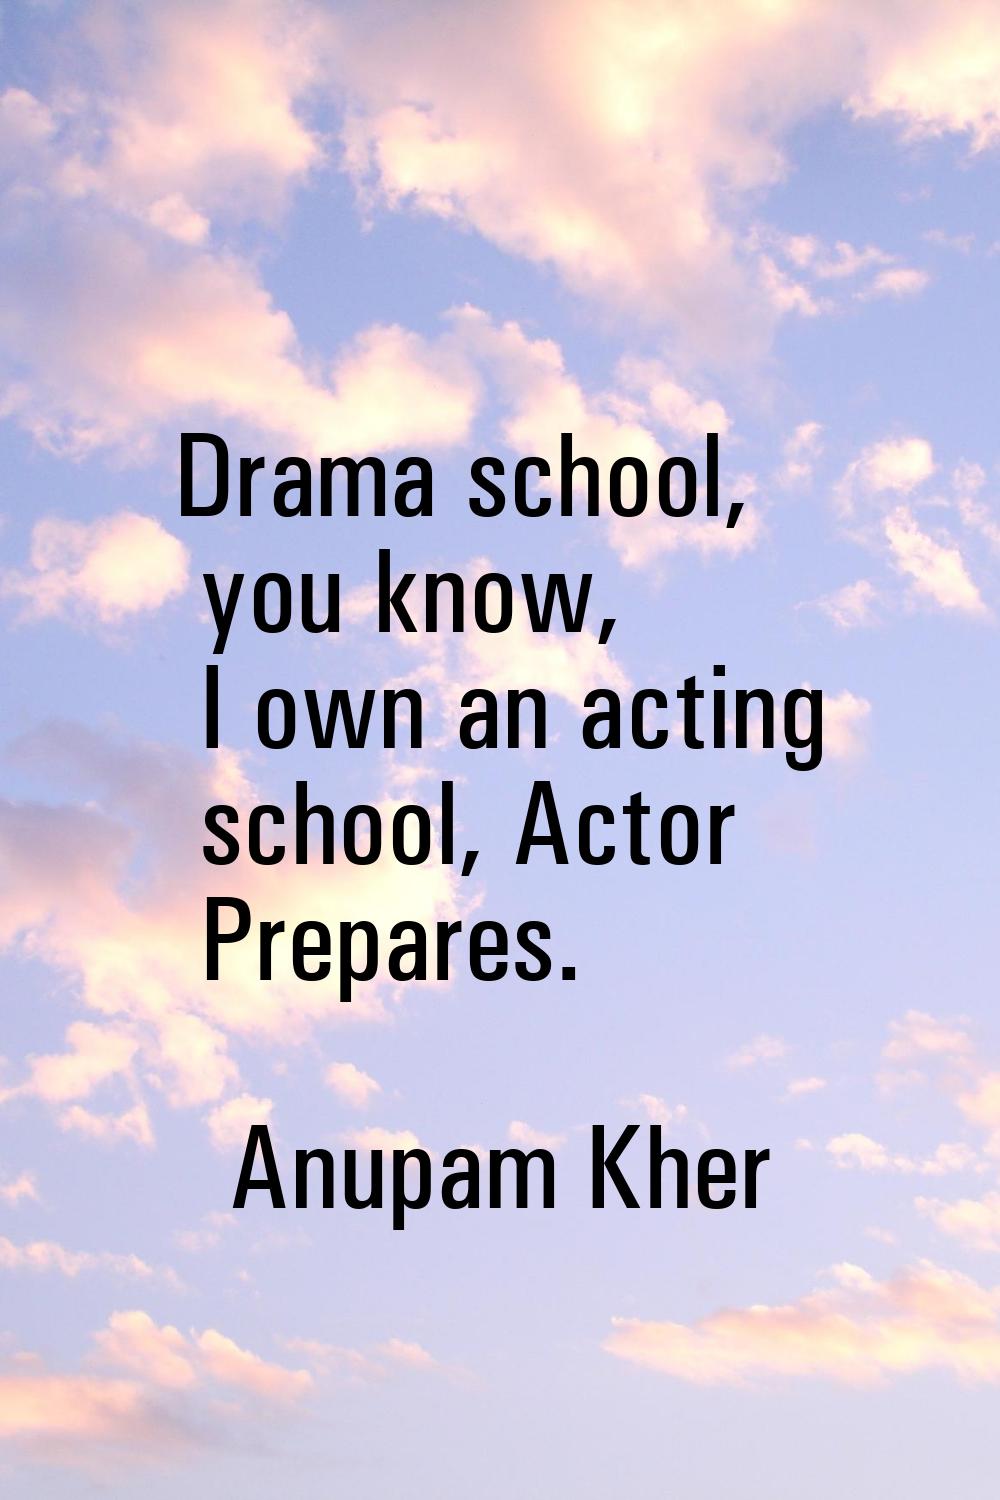 Drama school, you know, I own an acting school, Actor Prepares.